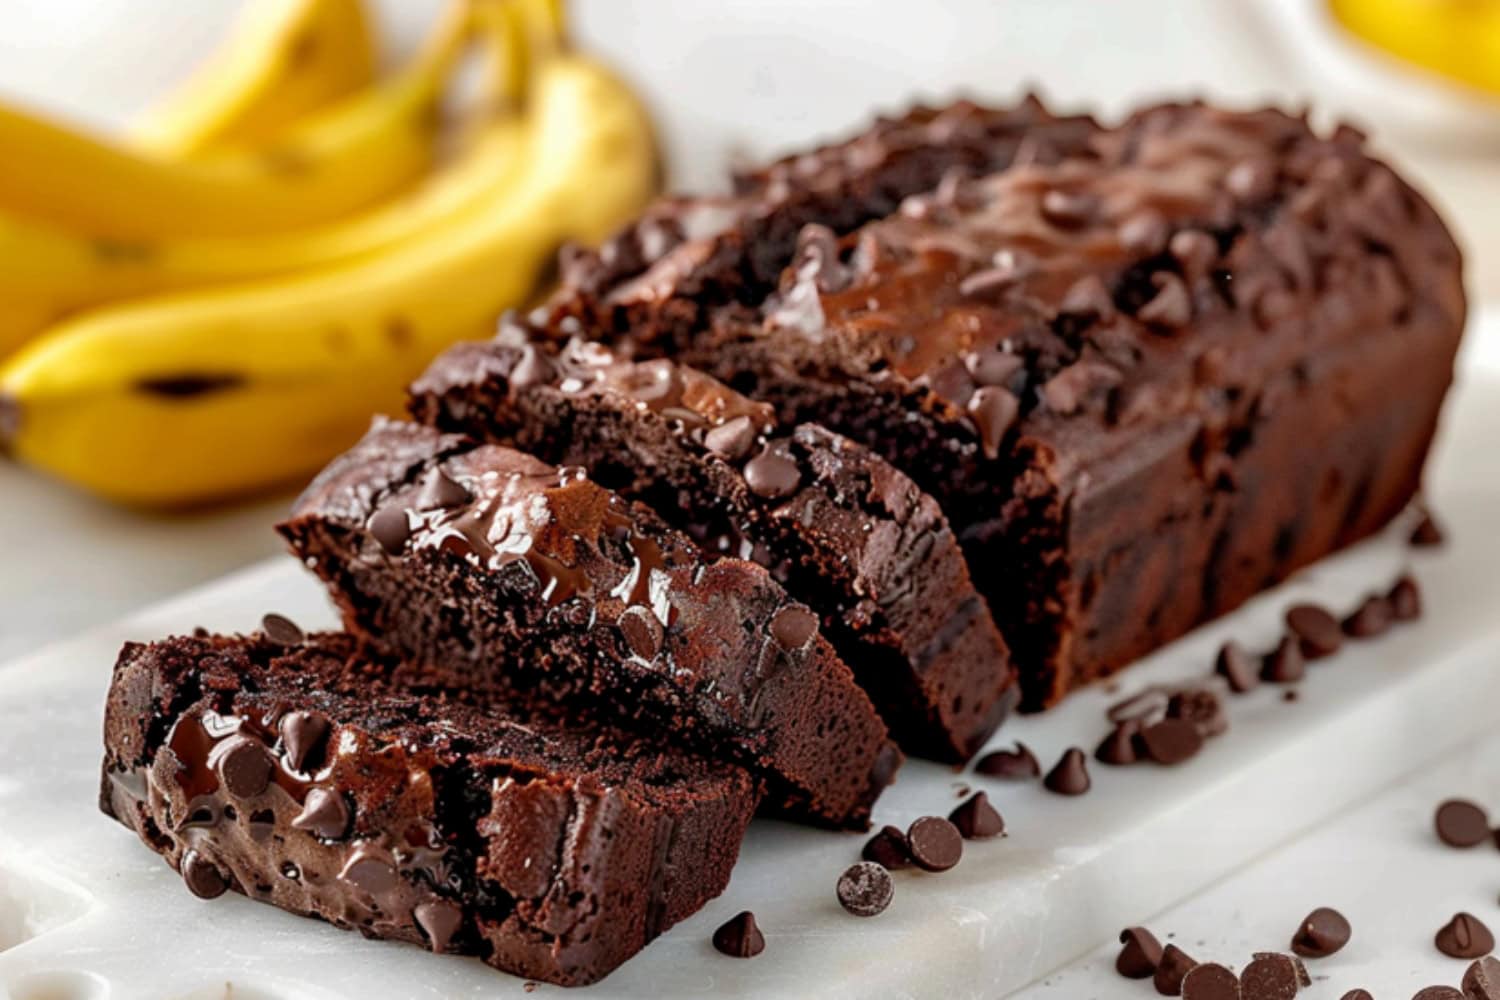 Chocolate banana loaf bread on a cutting board with fresh bananas on the side.